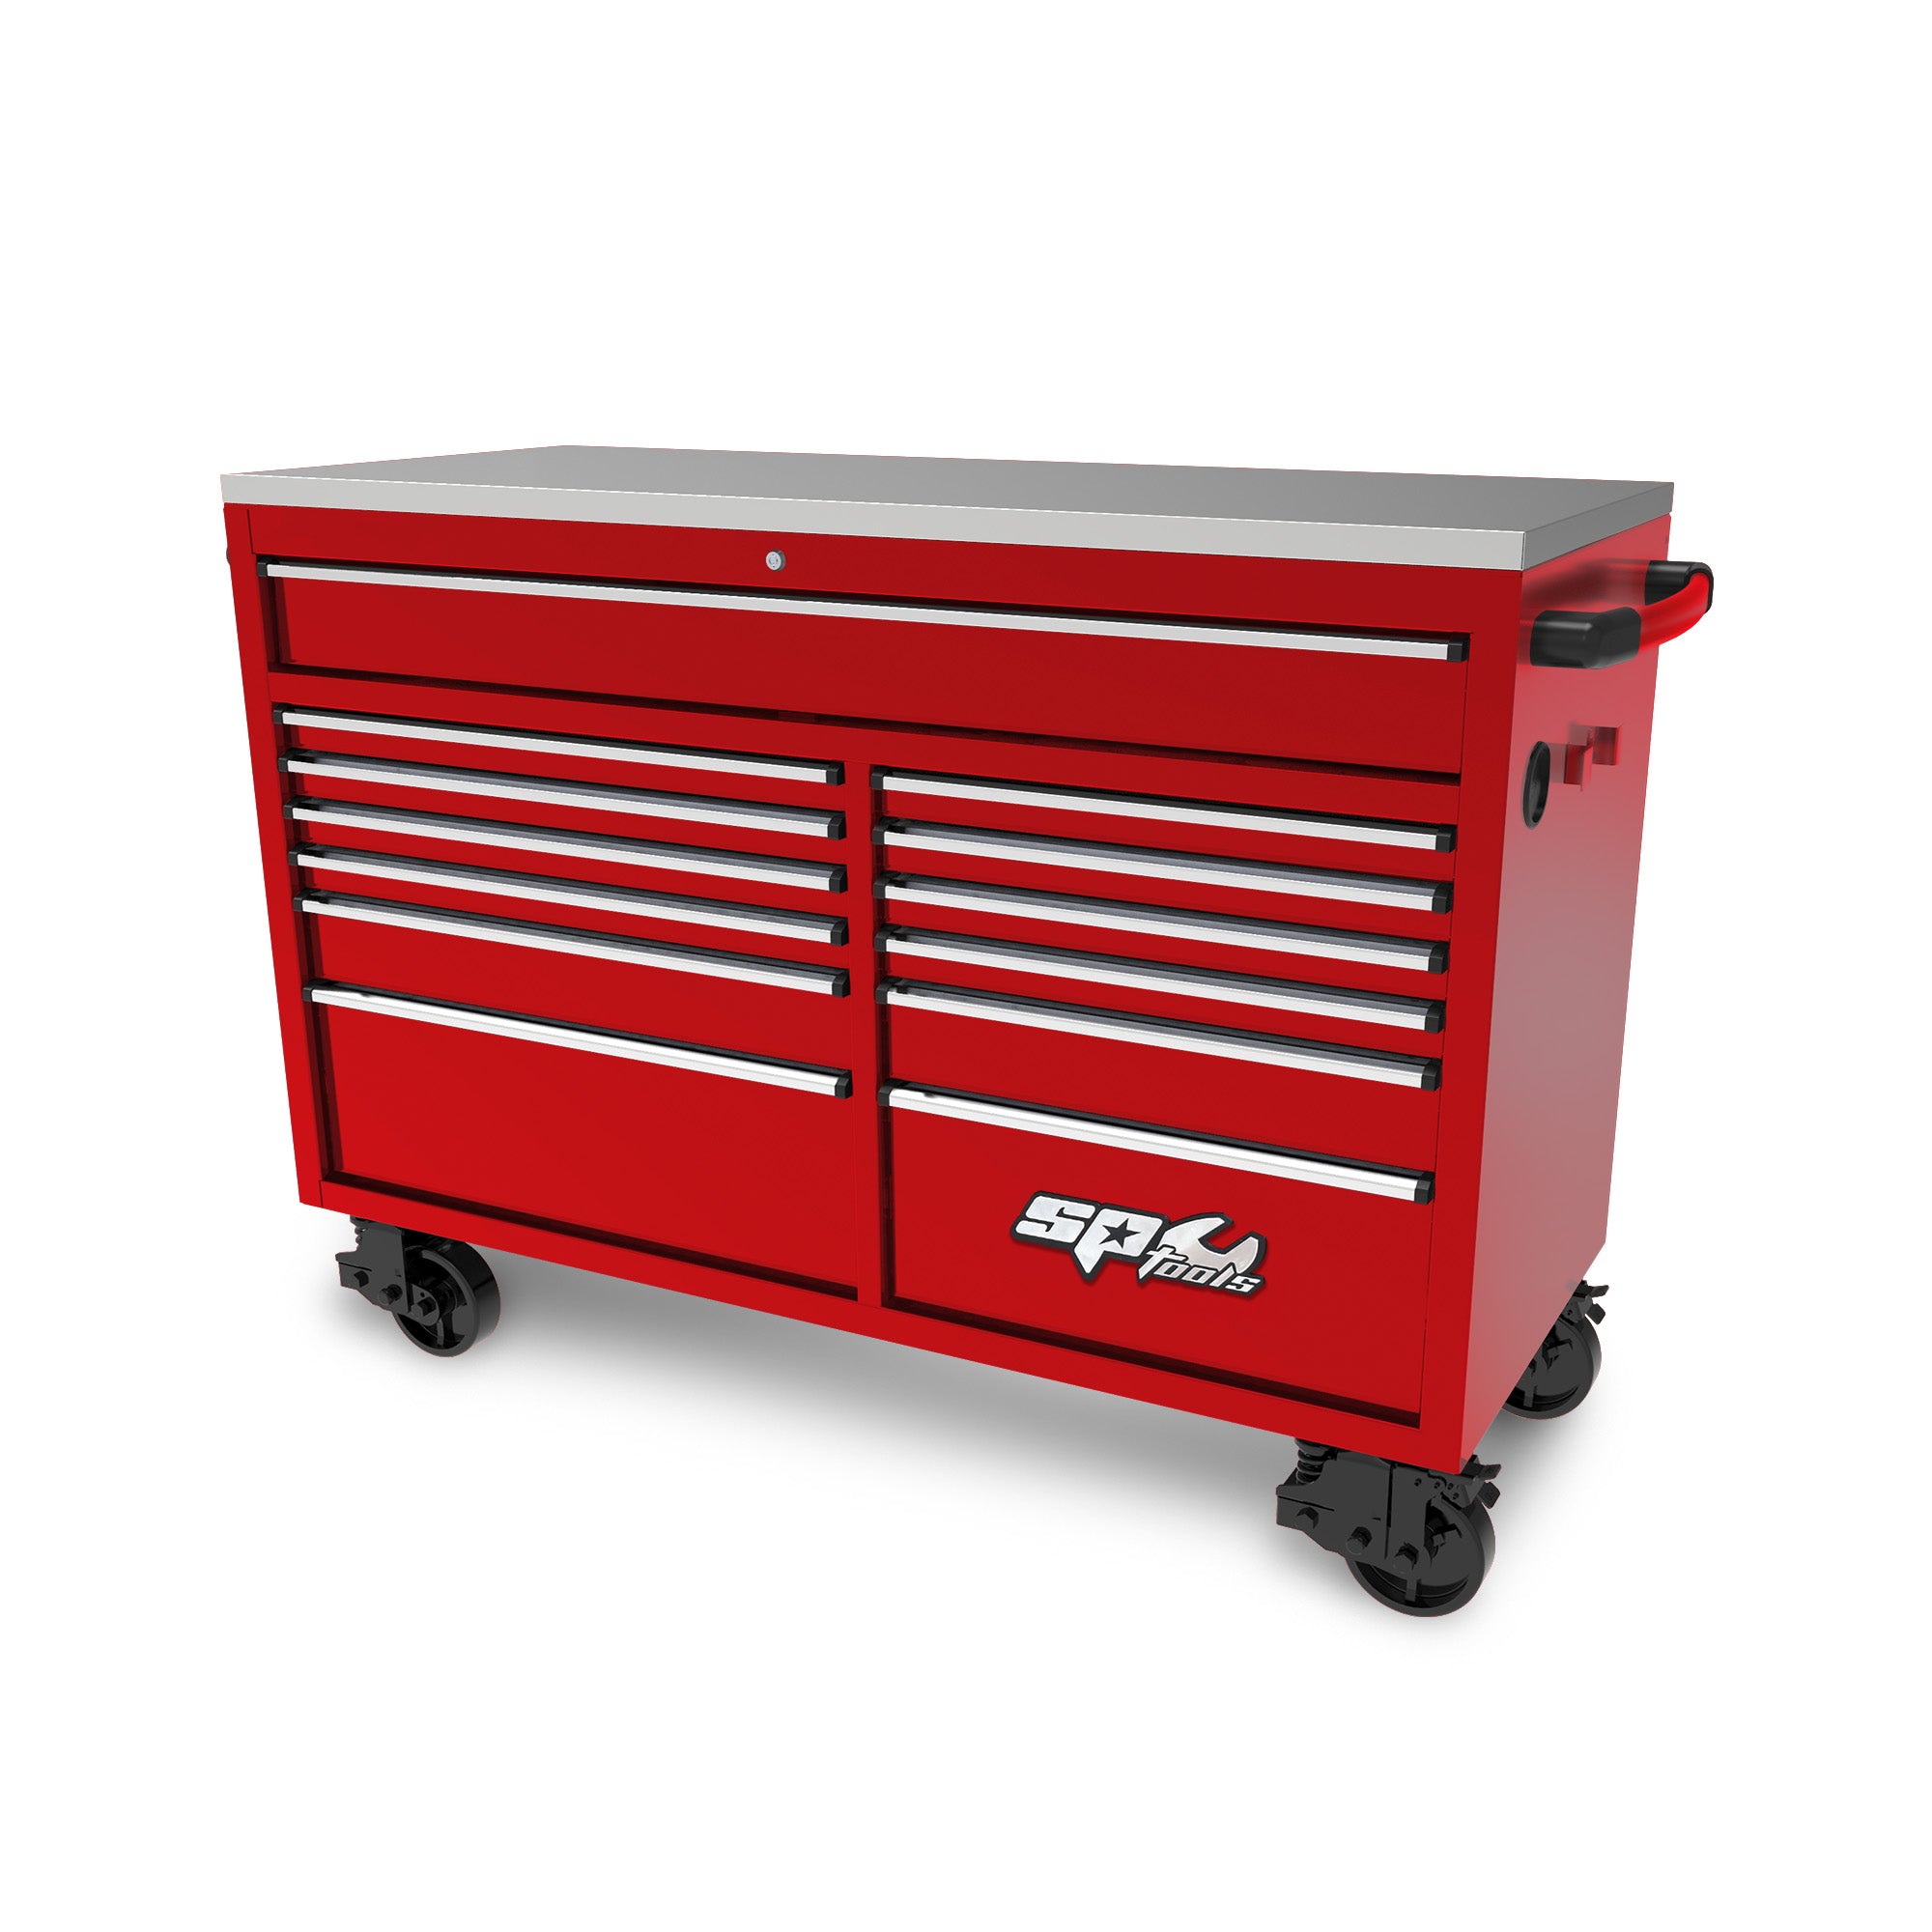 59" 13 Drawer Double Bank Toolbox